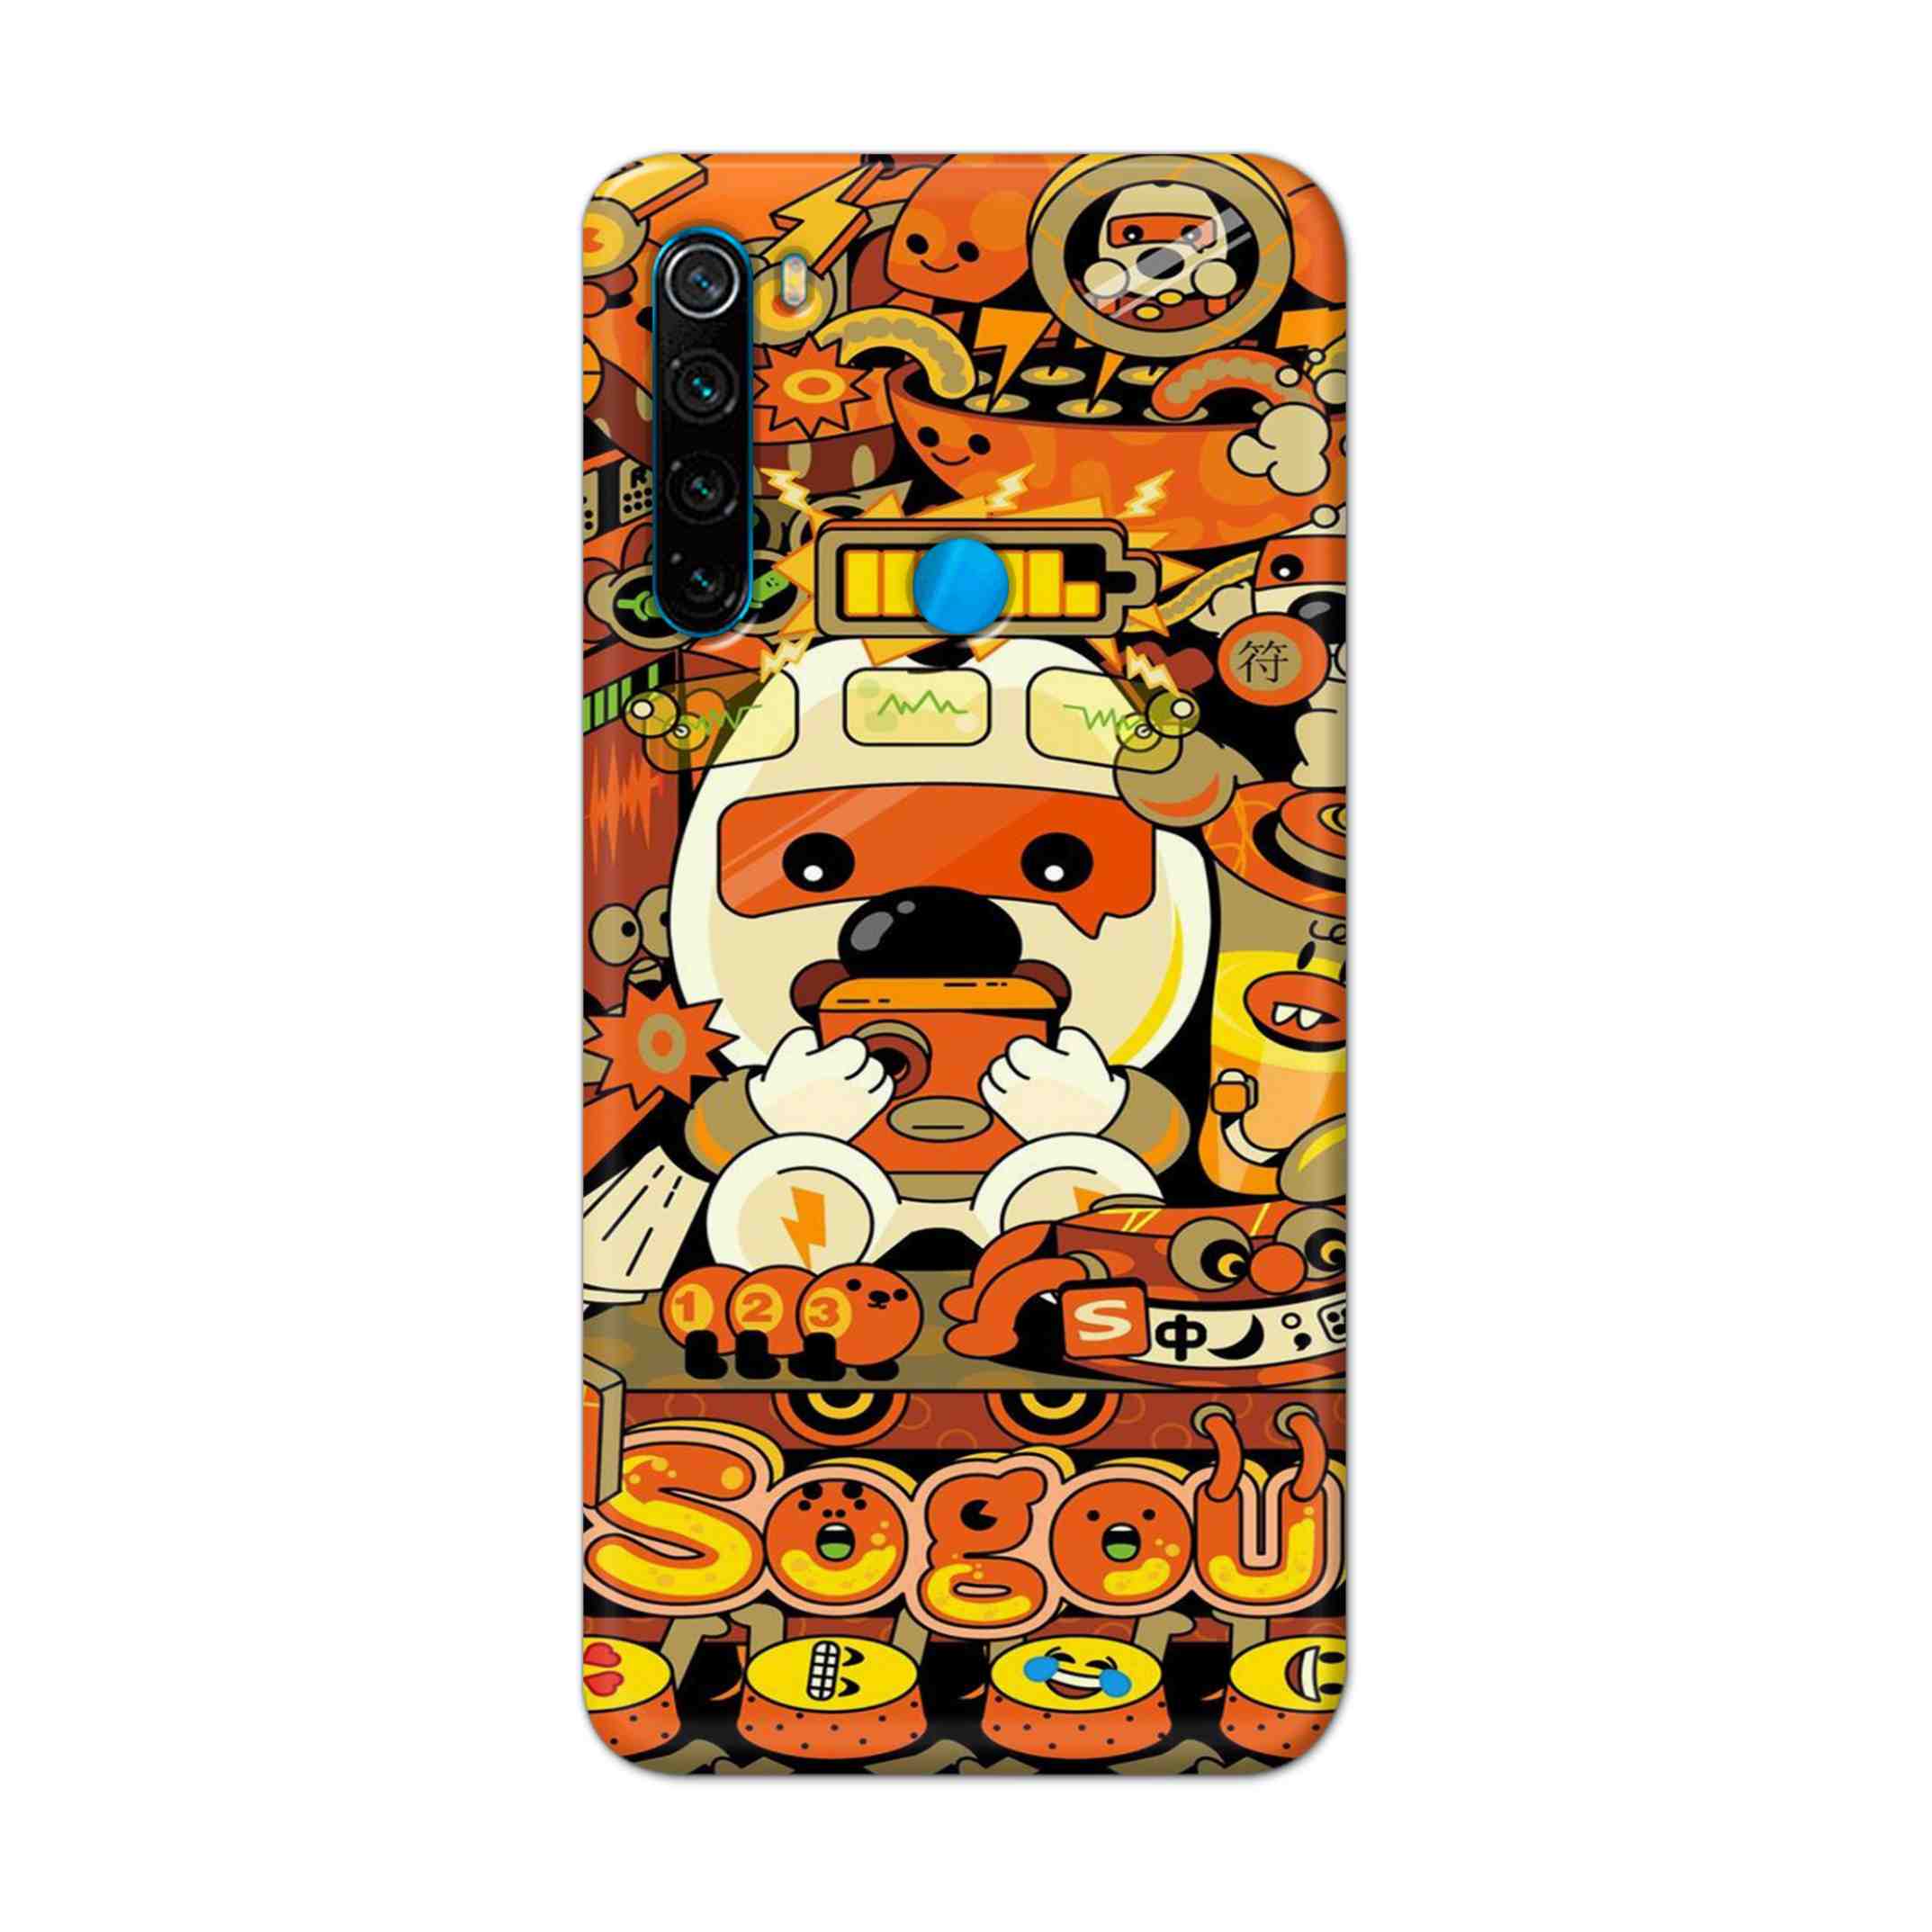 Buy Sogou Hard Back Mobile Phone Case Cover For Xiaomi Redmi Note 8 Online